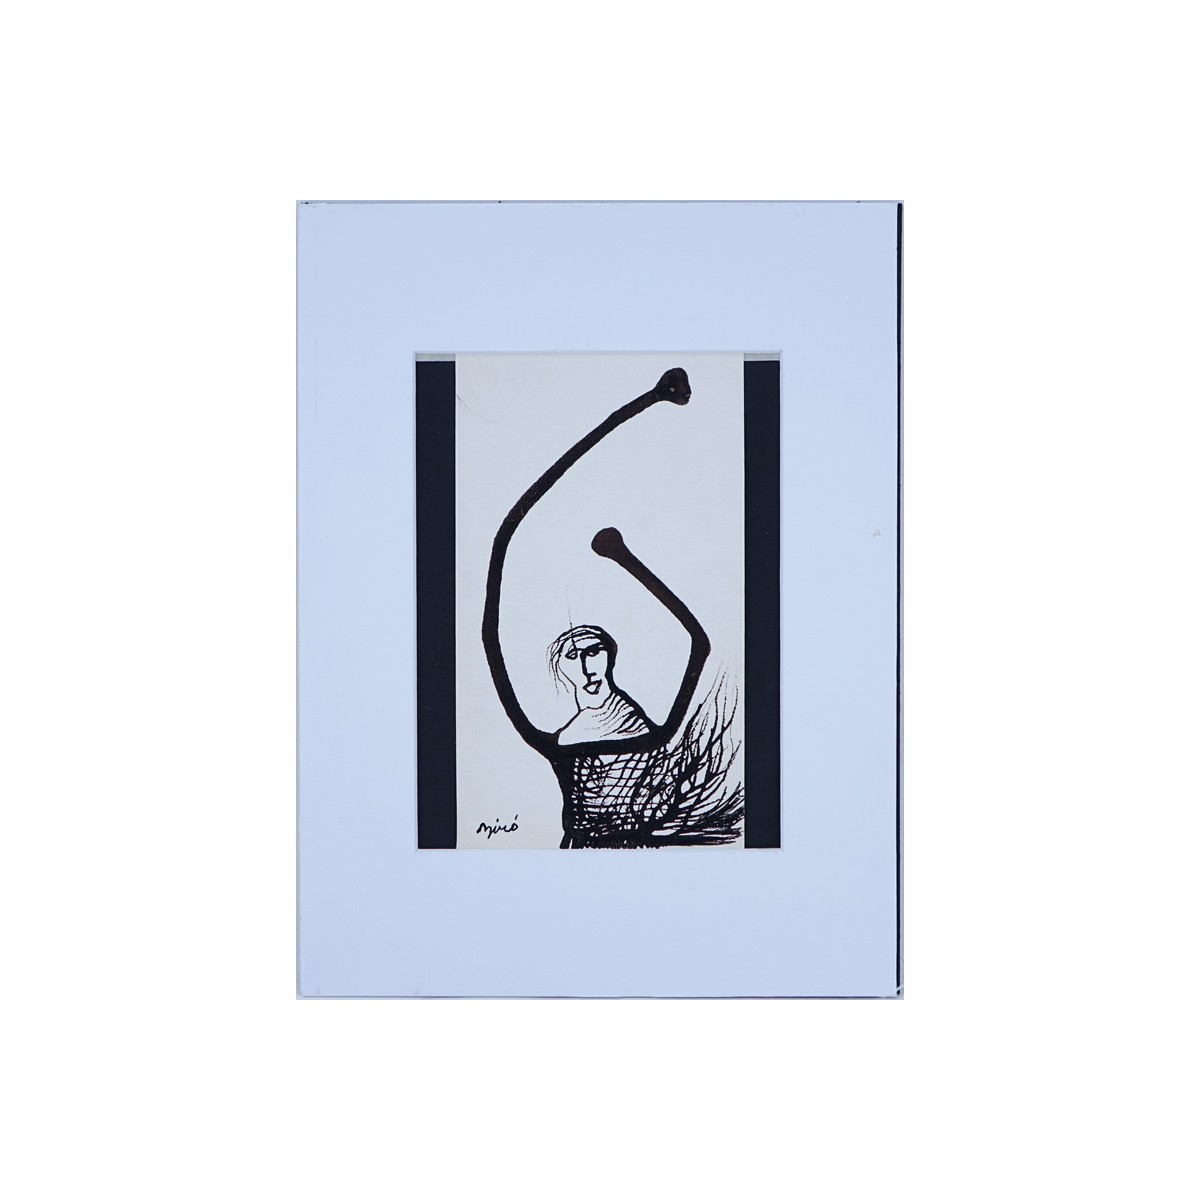 Antal Biro, French (1907 - 1990) Ink on card "Abstract Figure". Signed lower left. Good condition. 